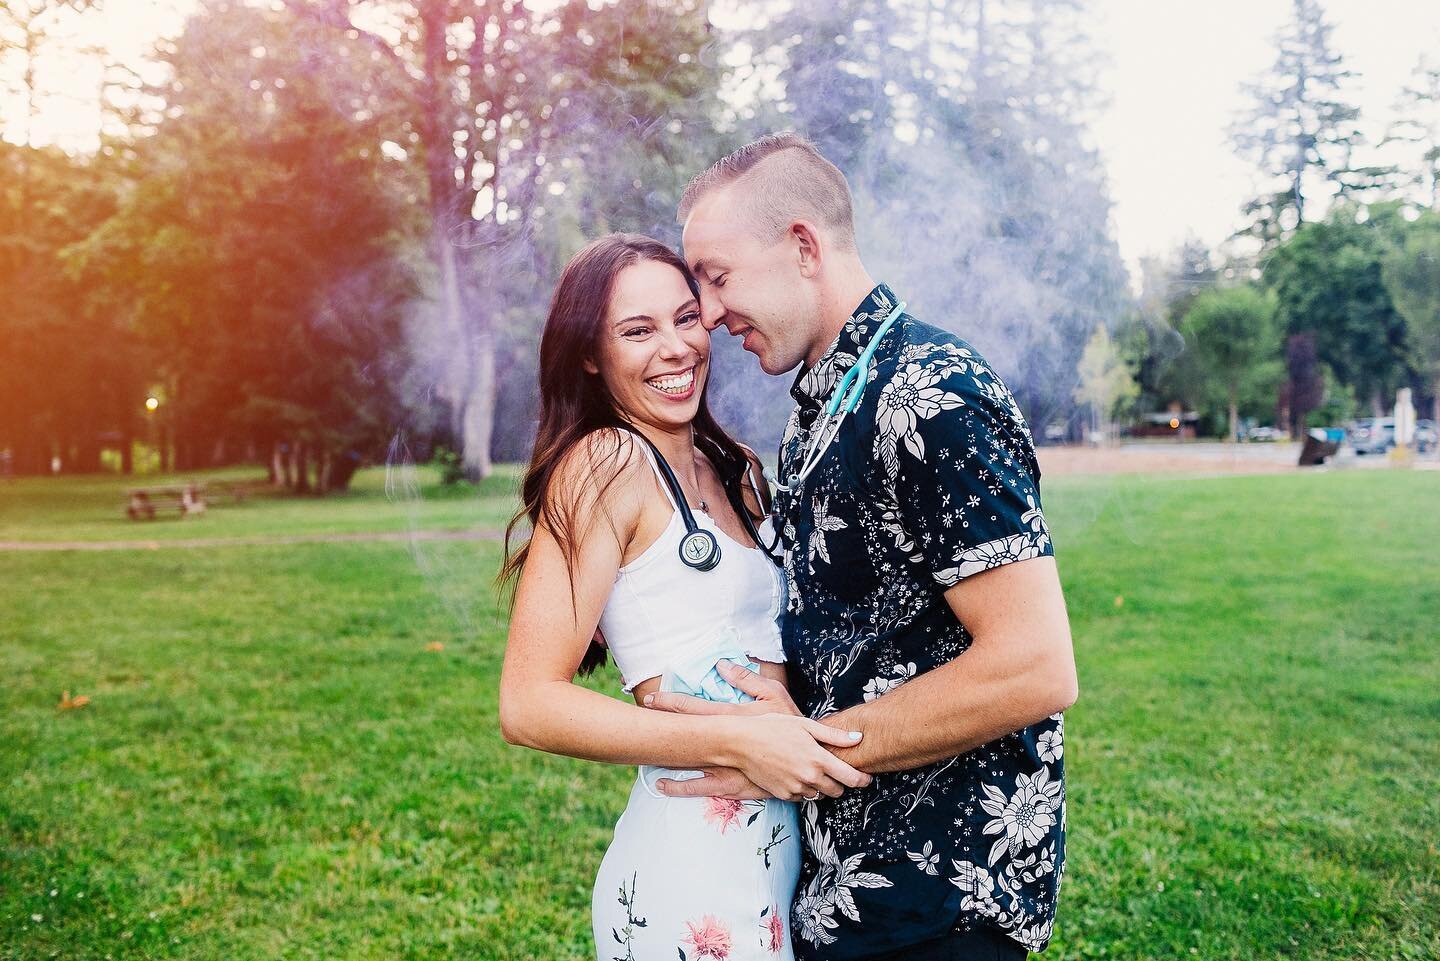 EIGHTEEN // KEENAN &amp; DANIELLE: &ldquo;After Covid&rsquo;s initial takeover, I had to move back home from the mountains and get back to work as a paramedic in Abbotsford.

There wasn't a whole lot to do and being the energetic guy I am, I guess I 